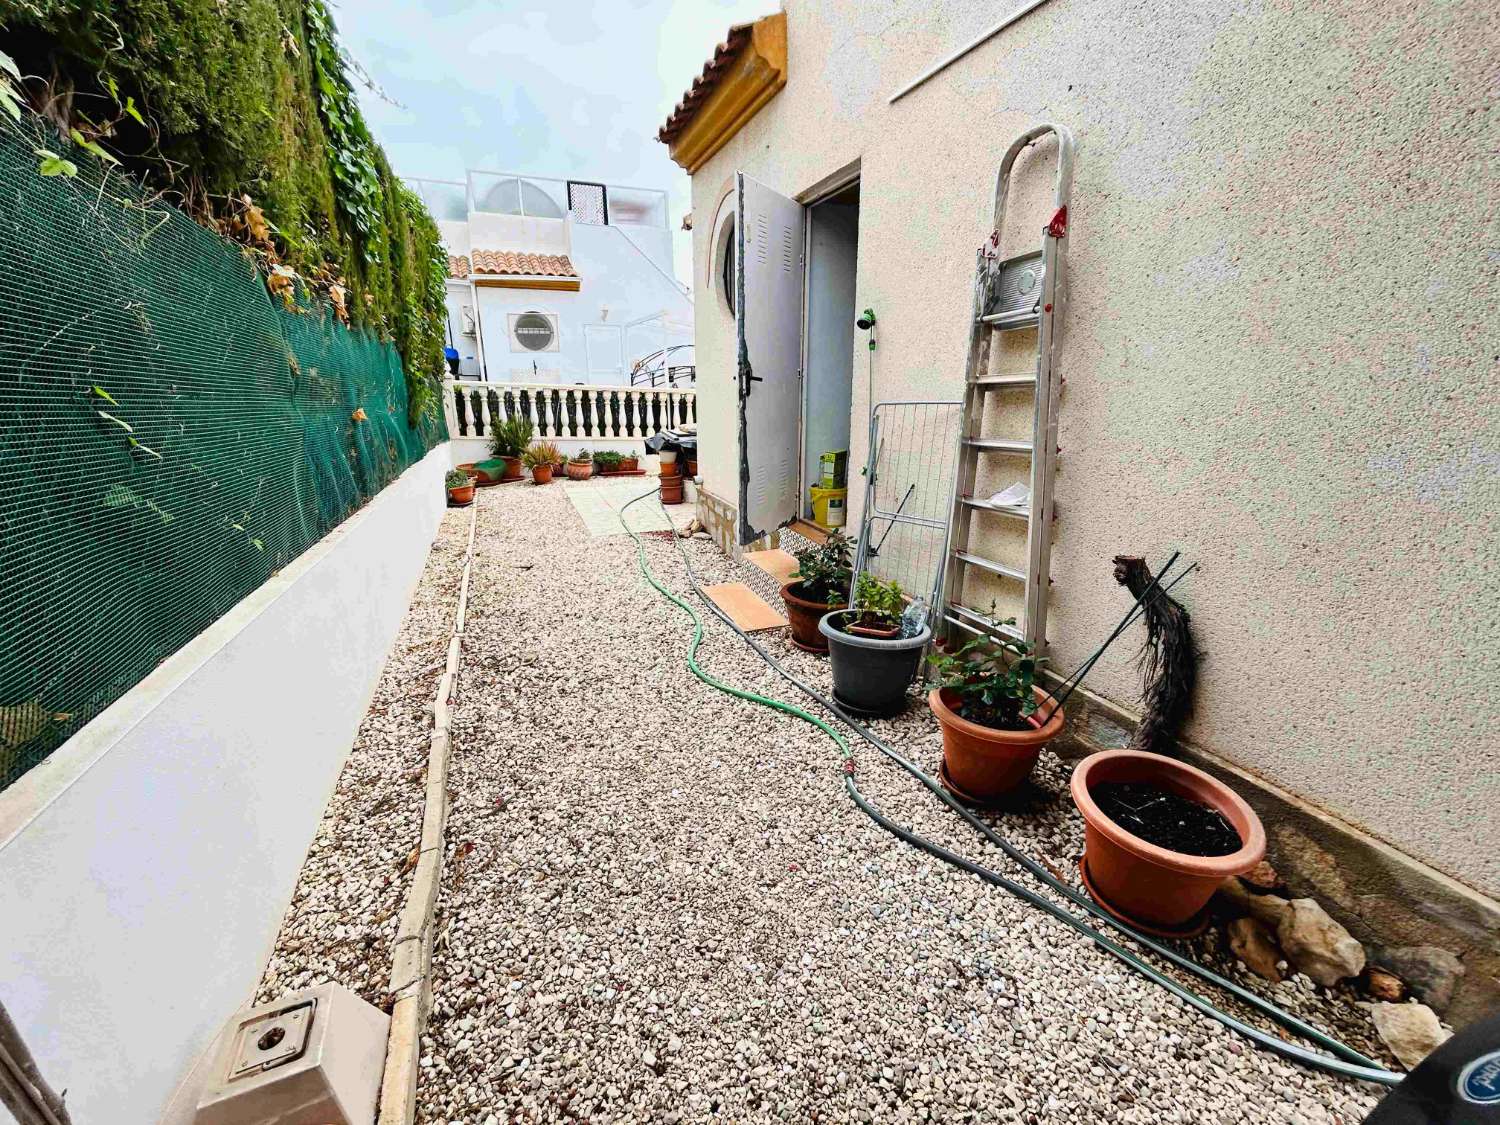 WONDERFUL SEMI-DETACHED HOUSE WITH TERRACE, SOLARIUM AND PRIVATE PARKING NEAR THE BEACH